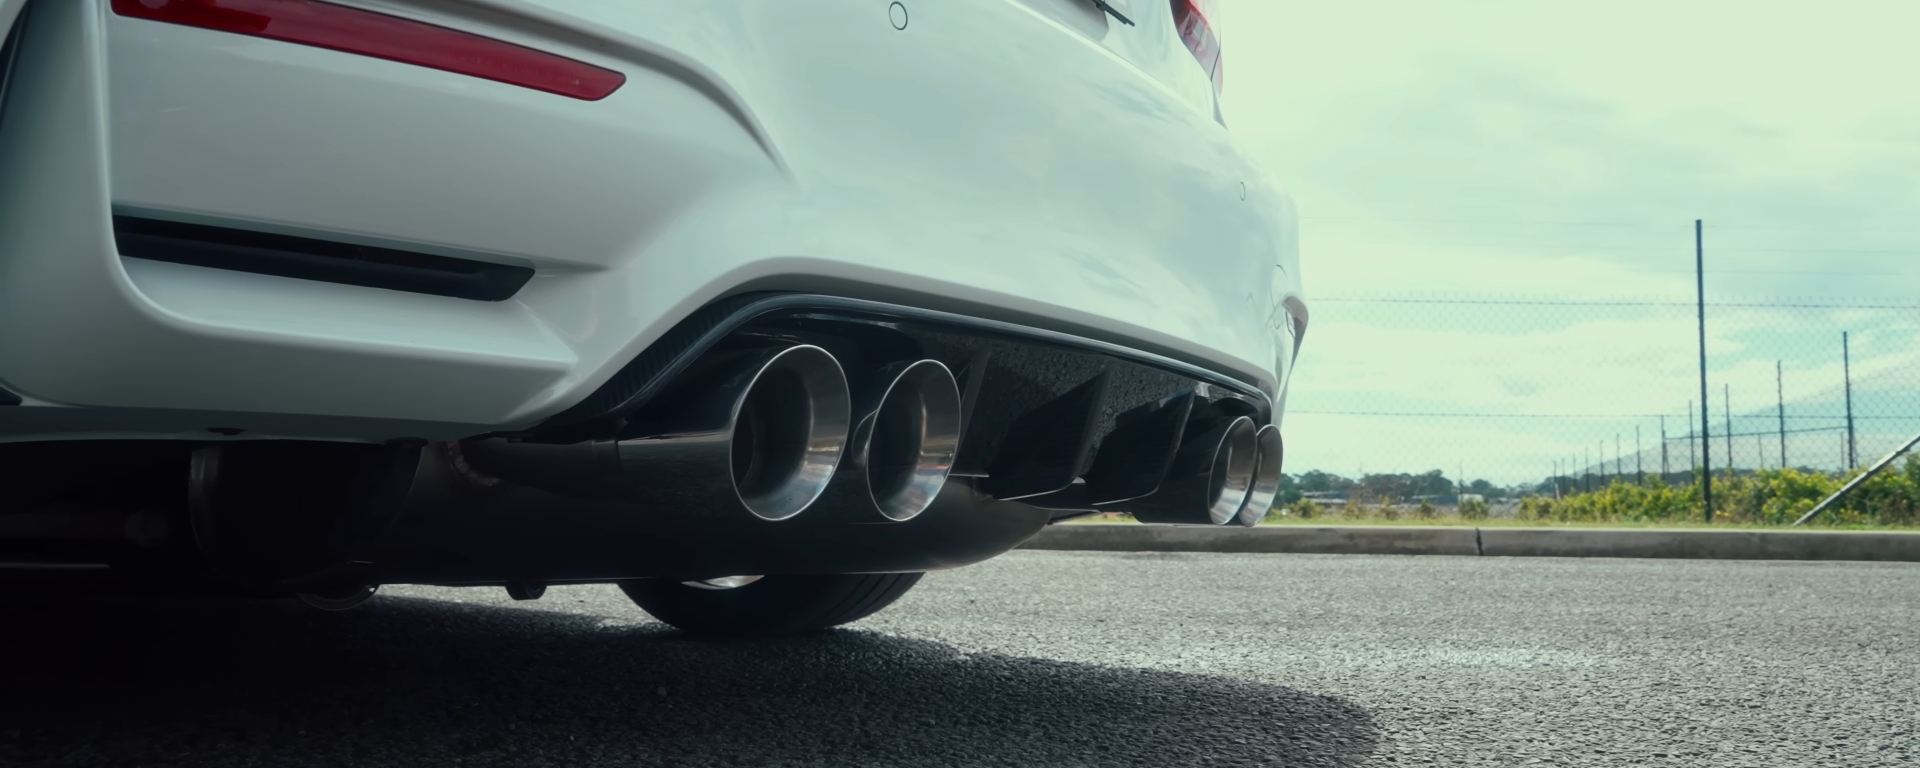 White BMW F80 M3 sports car with quad xForce exhaust tips on road.